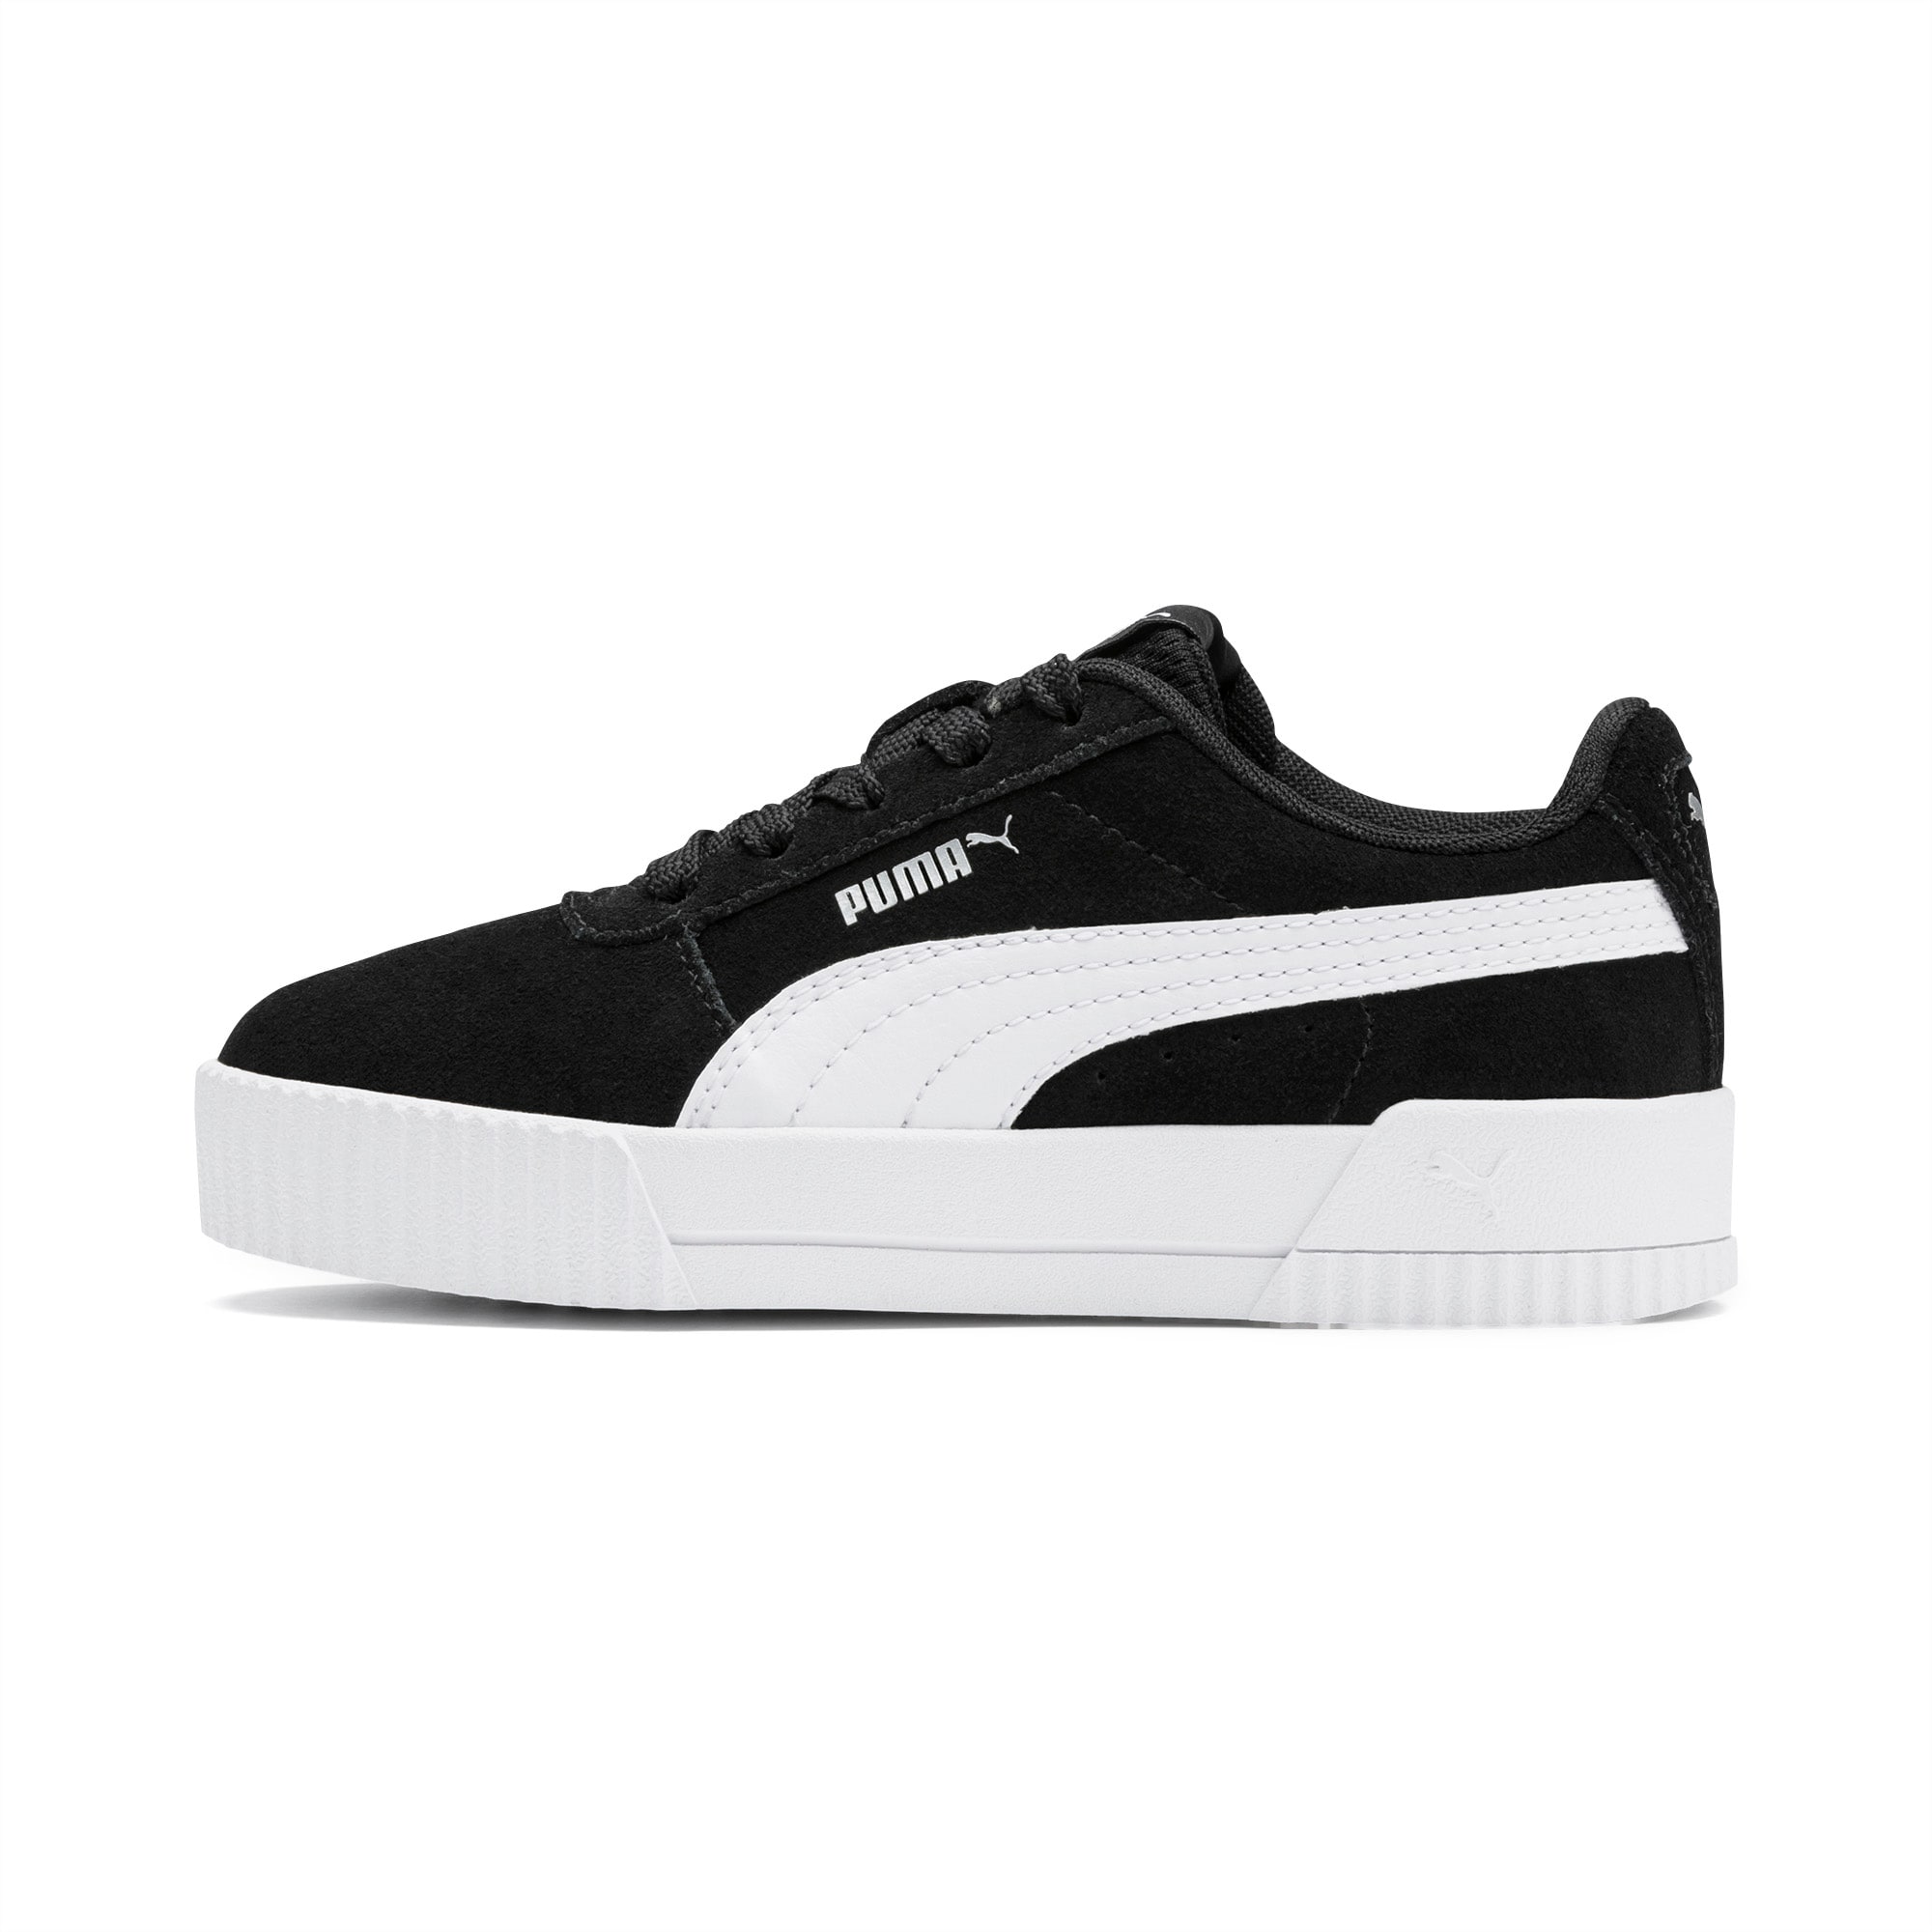 puma white sneakers for girls